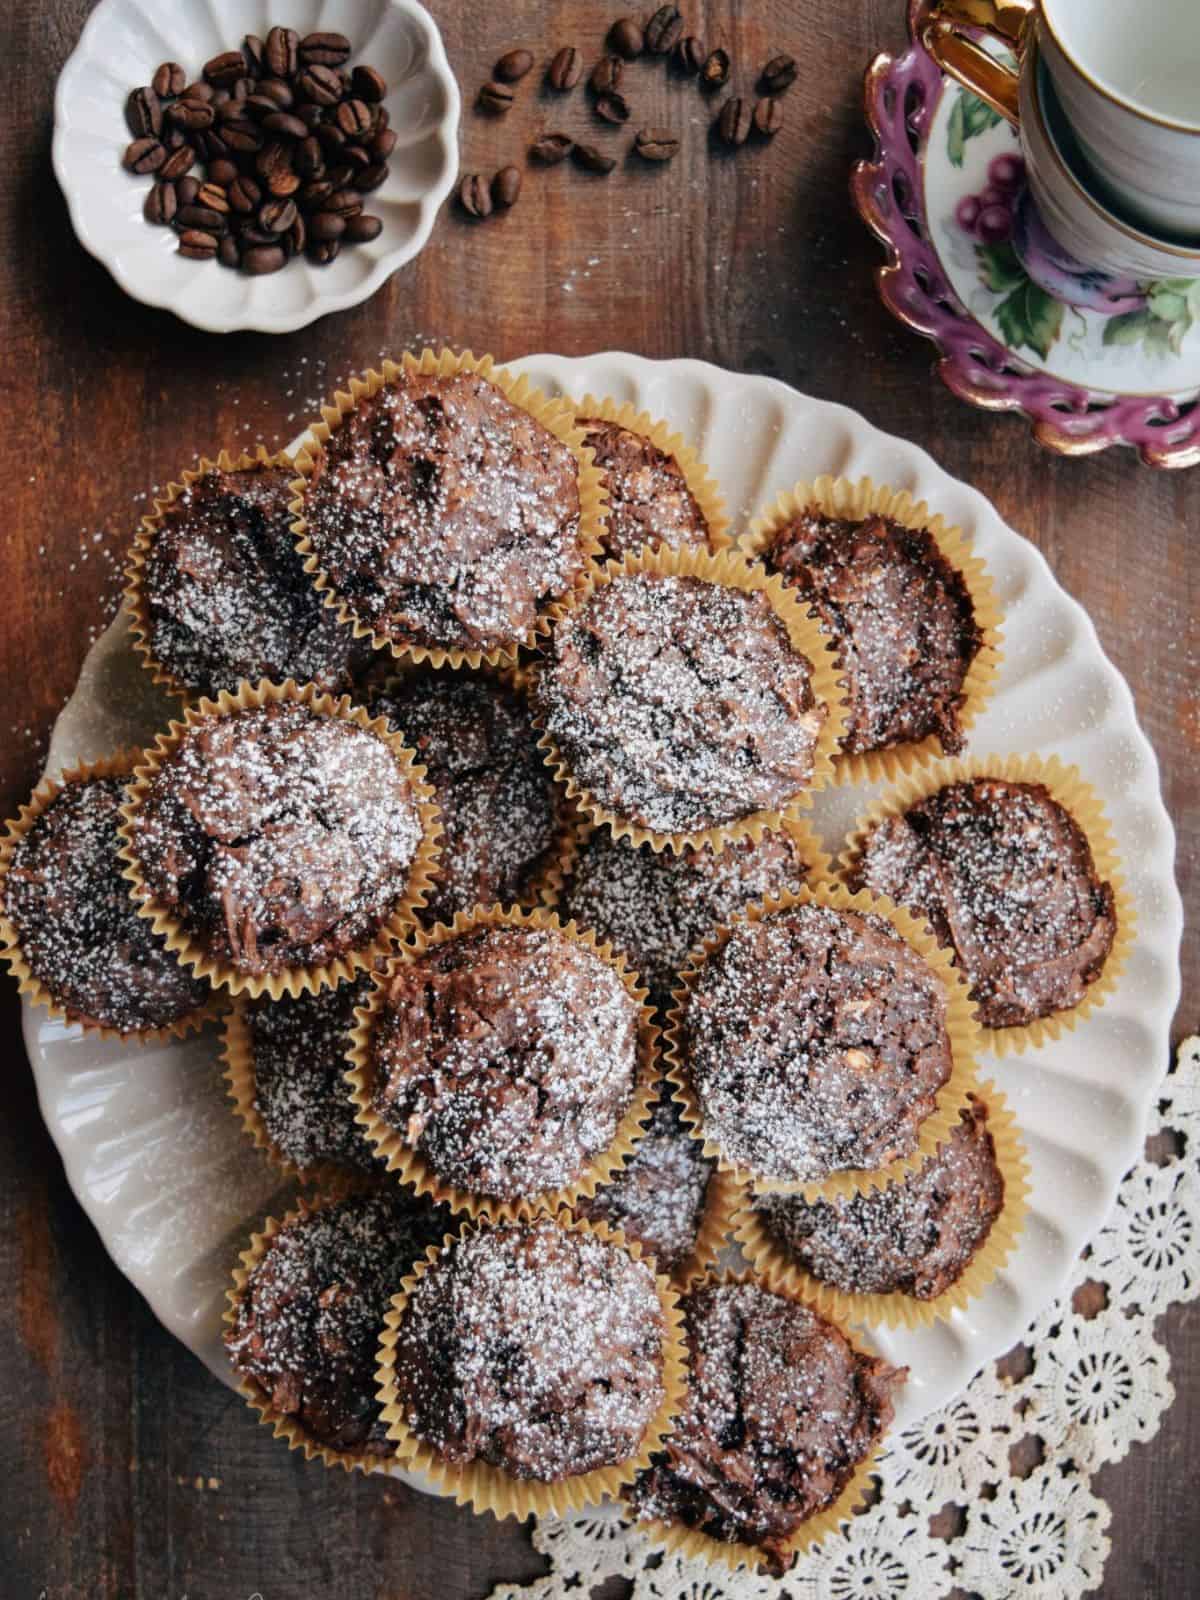 sweet and chocolatey brownie chocolate chip coffee muffins with rich cacao from dark chocolate.